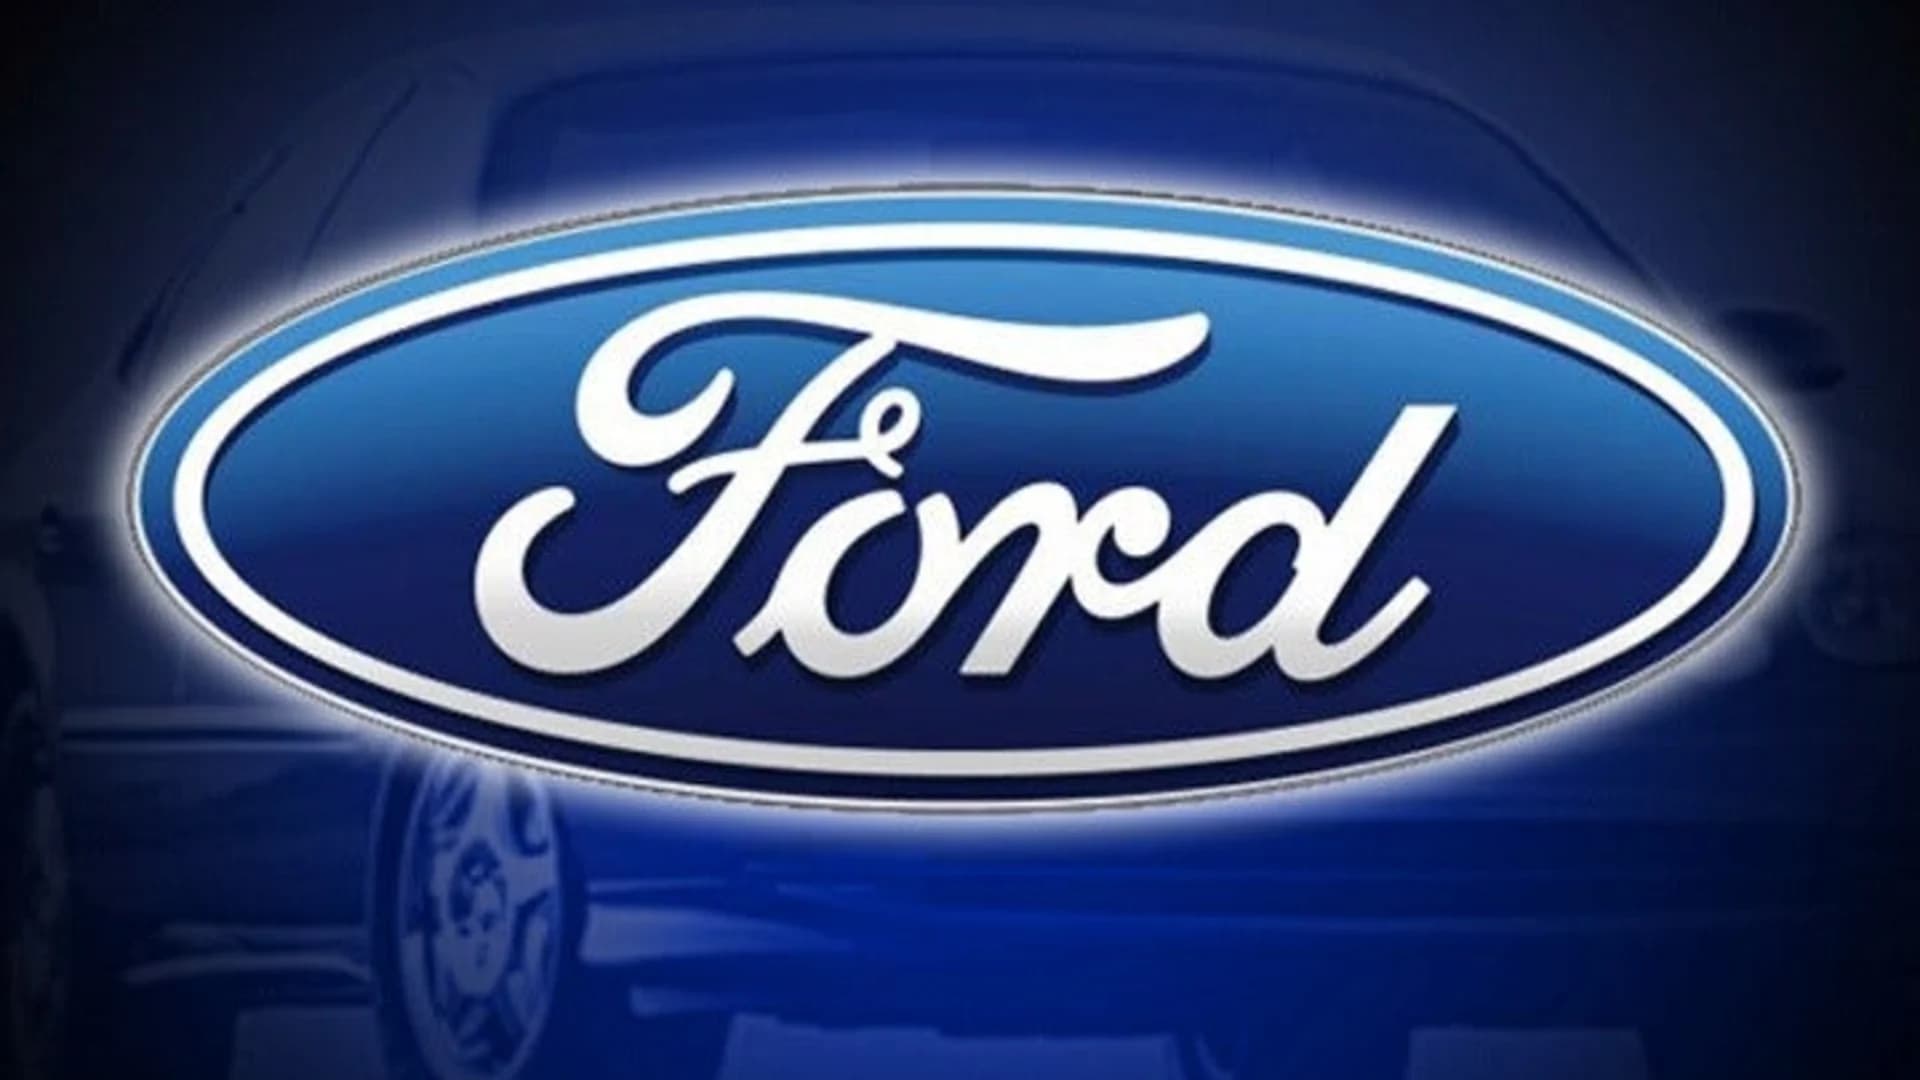 Ford recalls some vehicles due to sharp seat frame edge